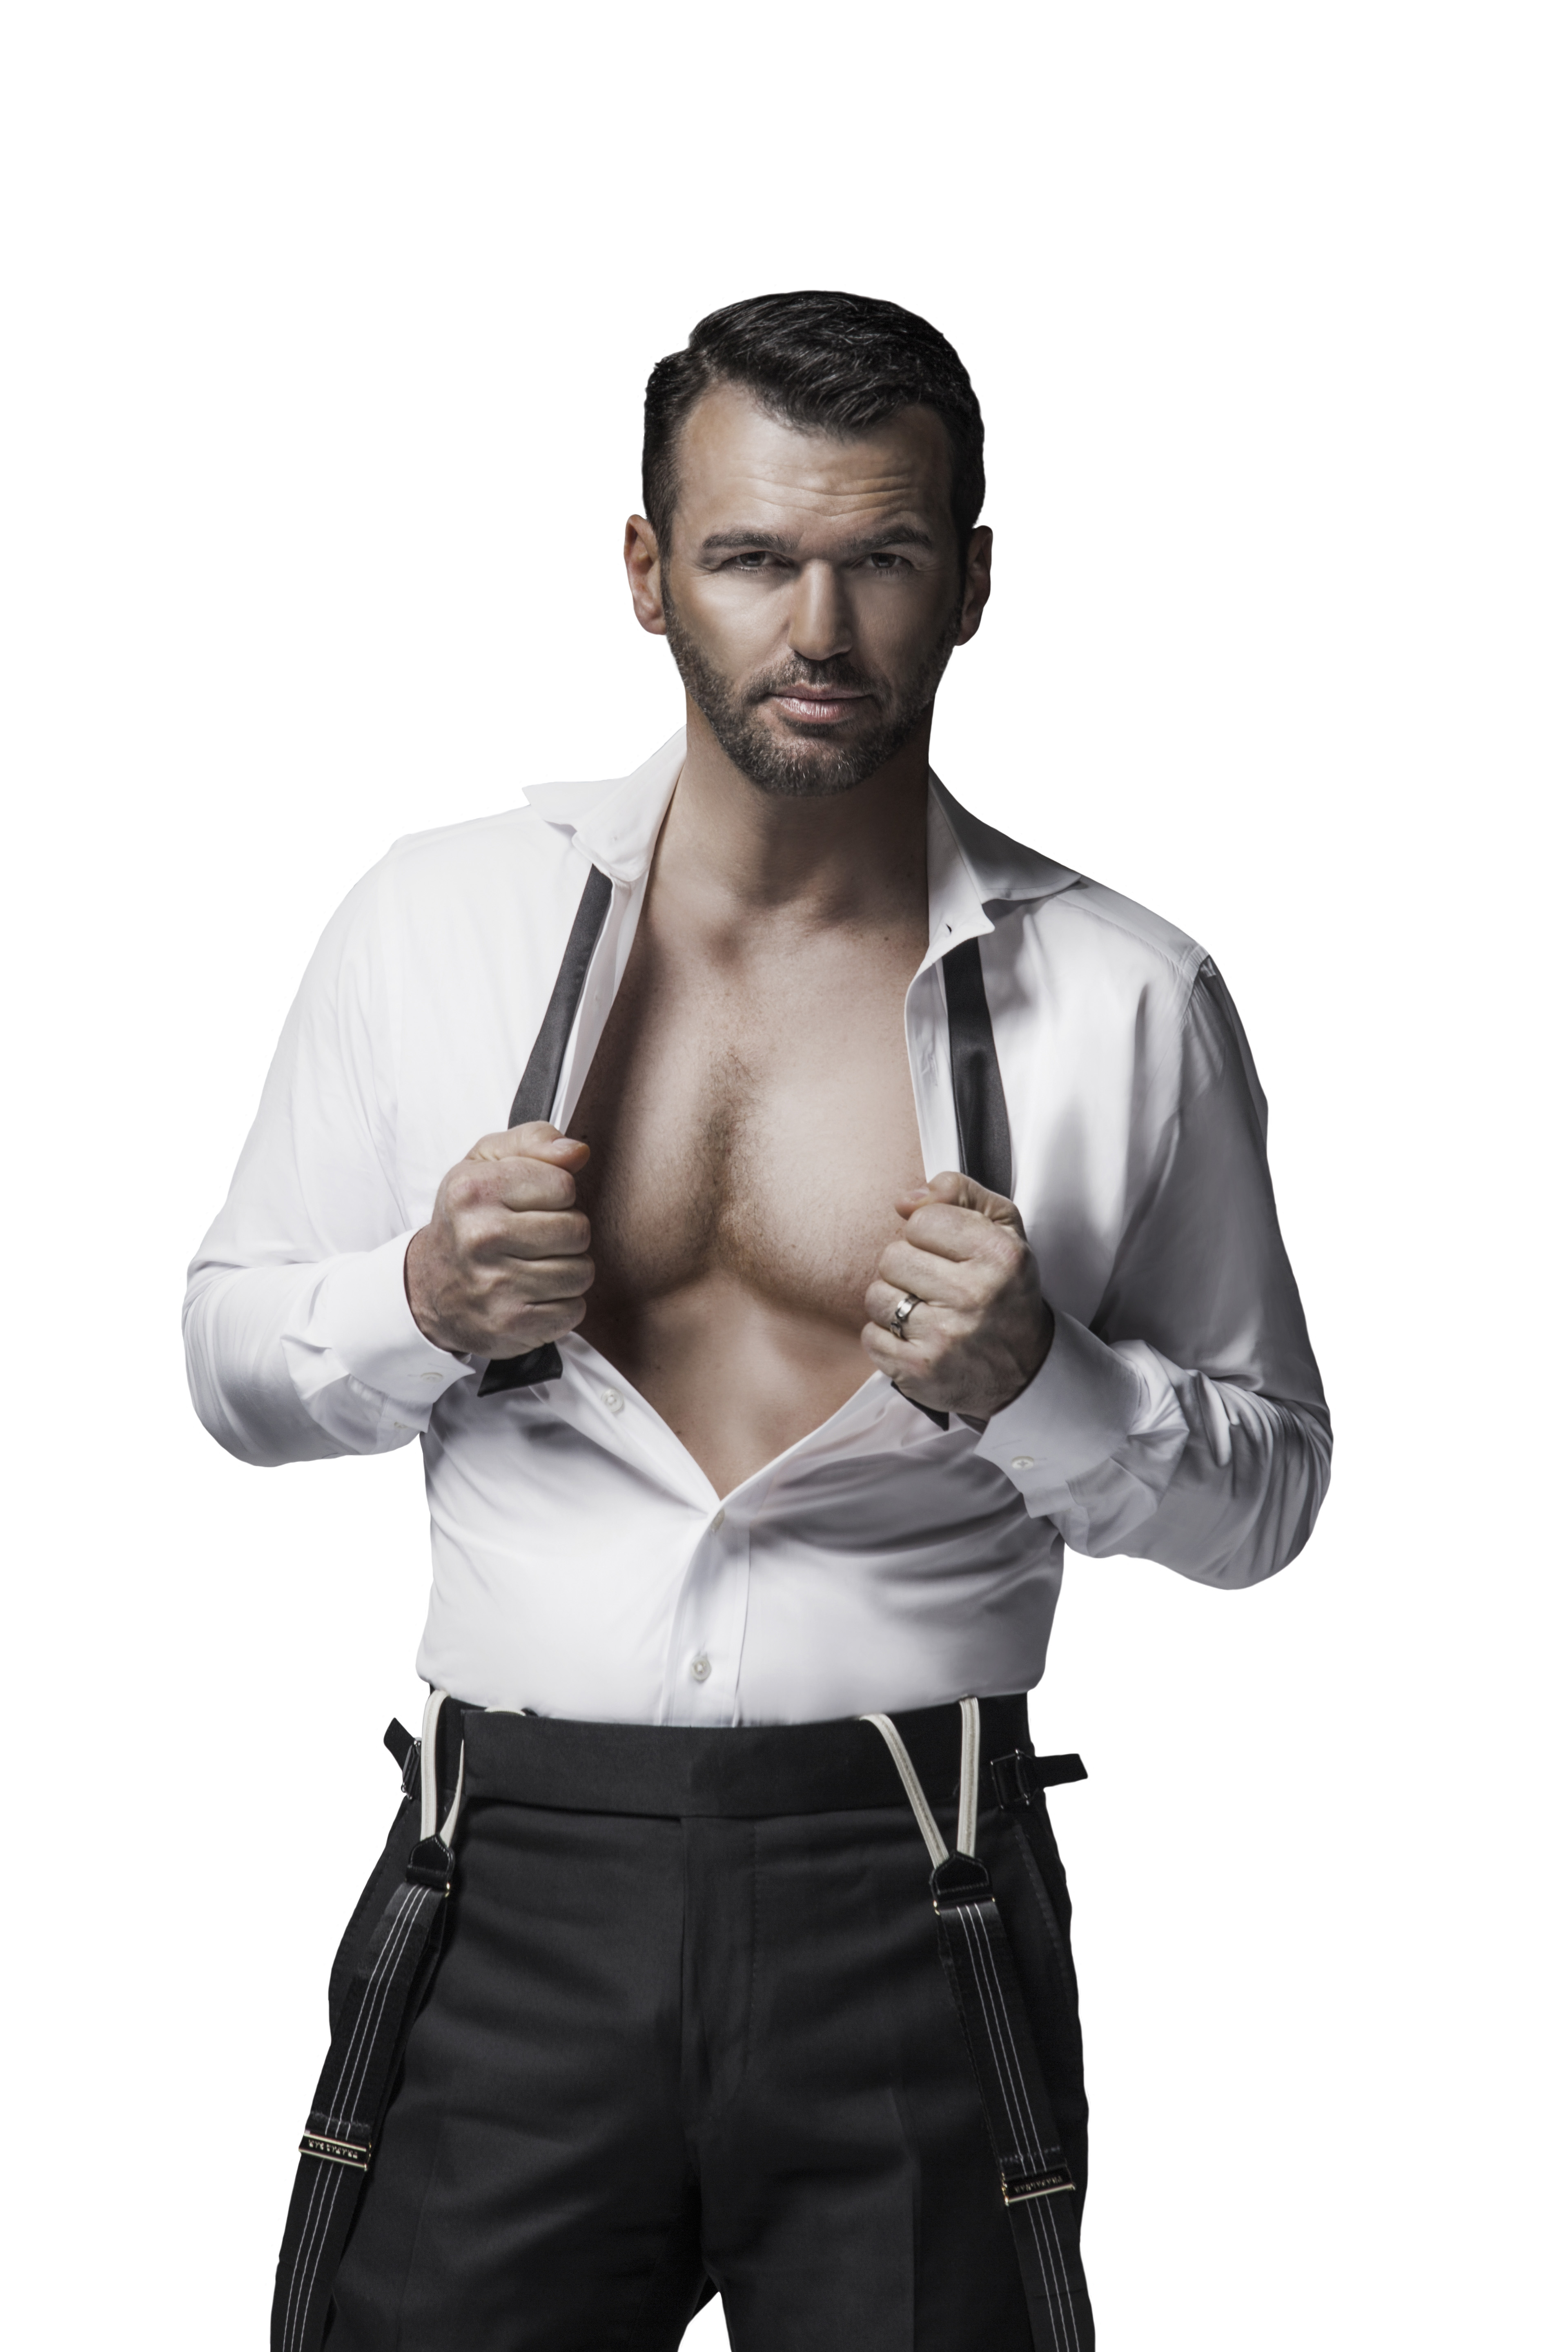 Dancing with the Stars professional dancer Tony Dovolani to be next Chippendales celebrity guest host.